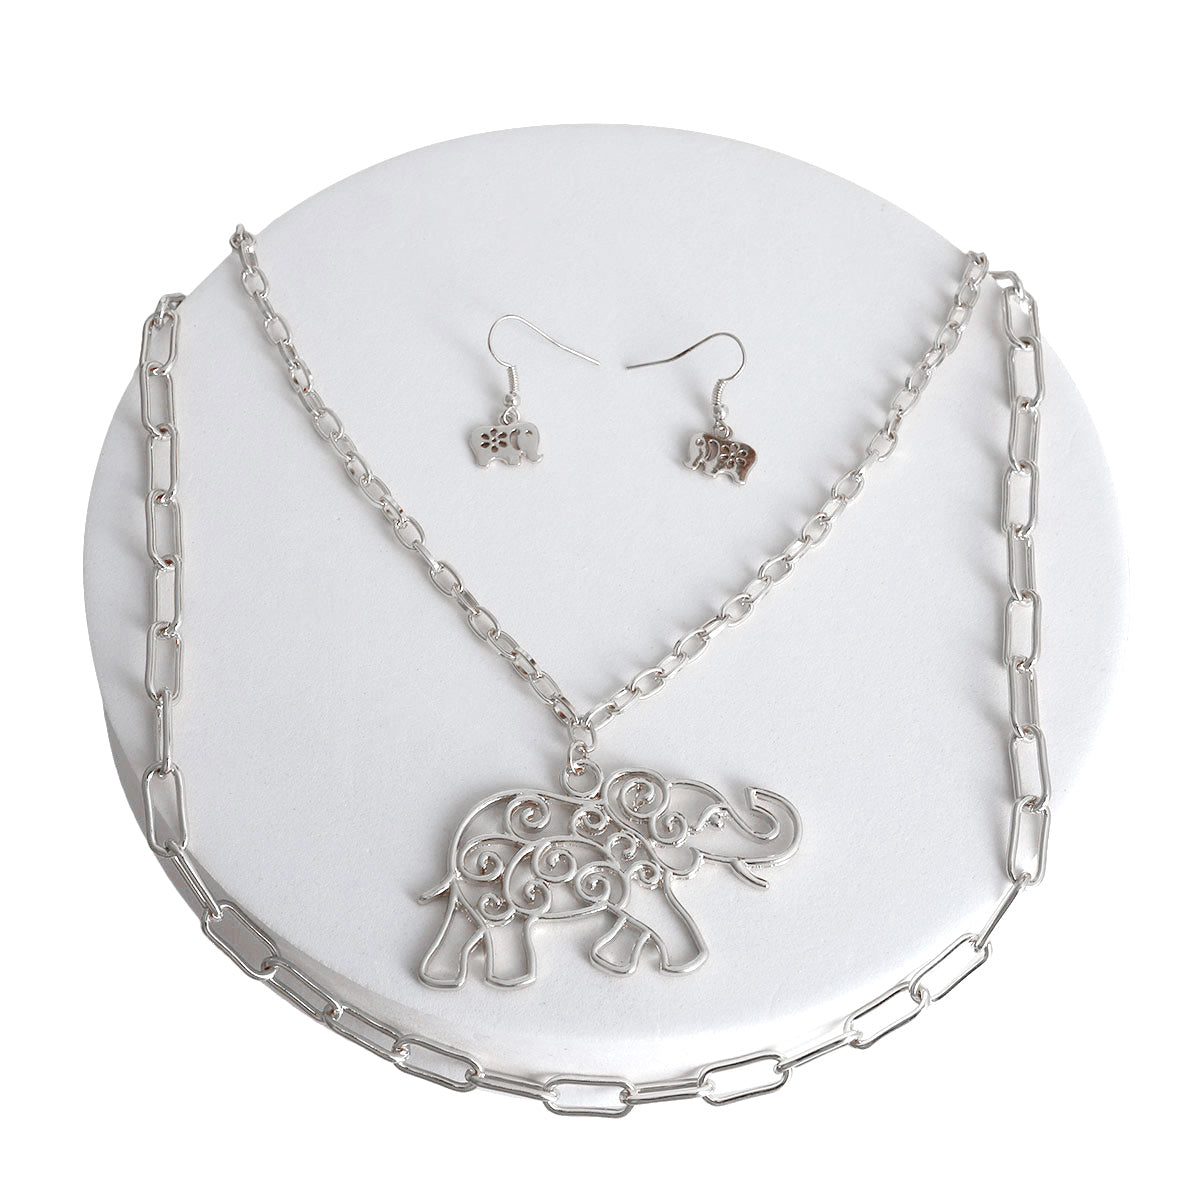 2 Layer Silver Chain Elephant Necklace